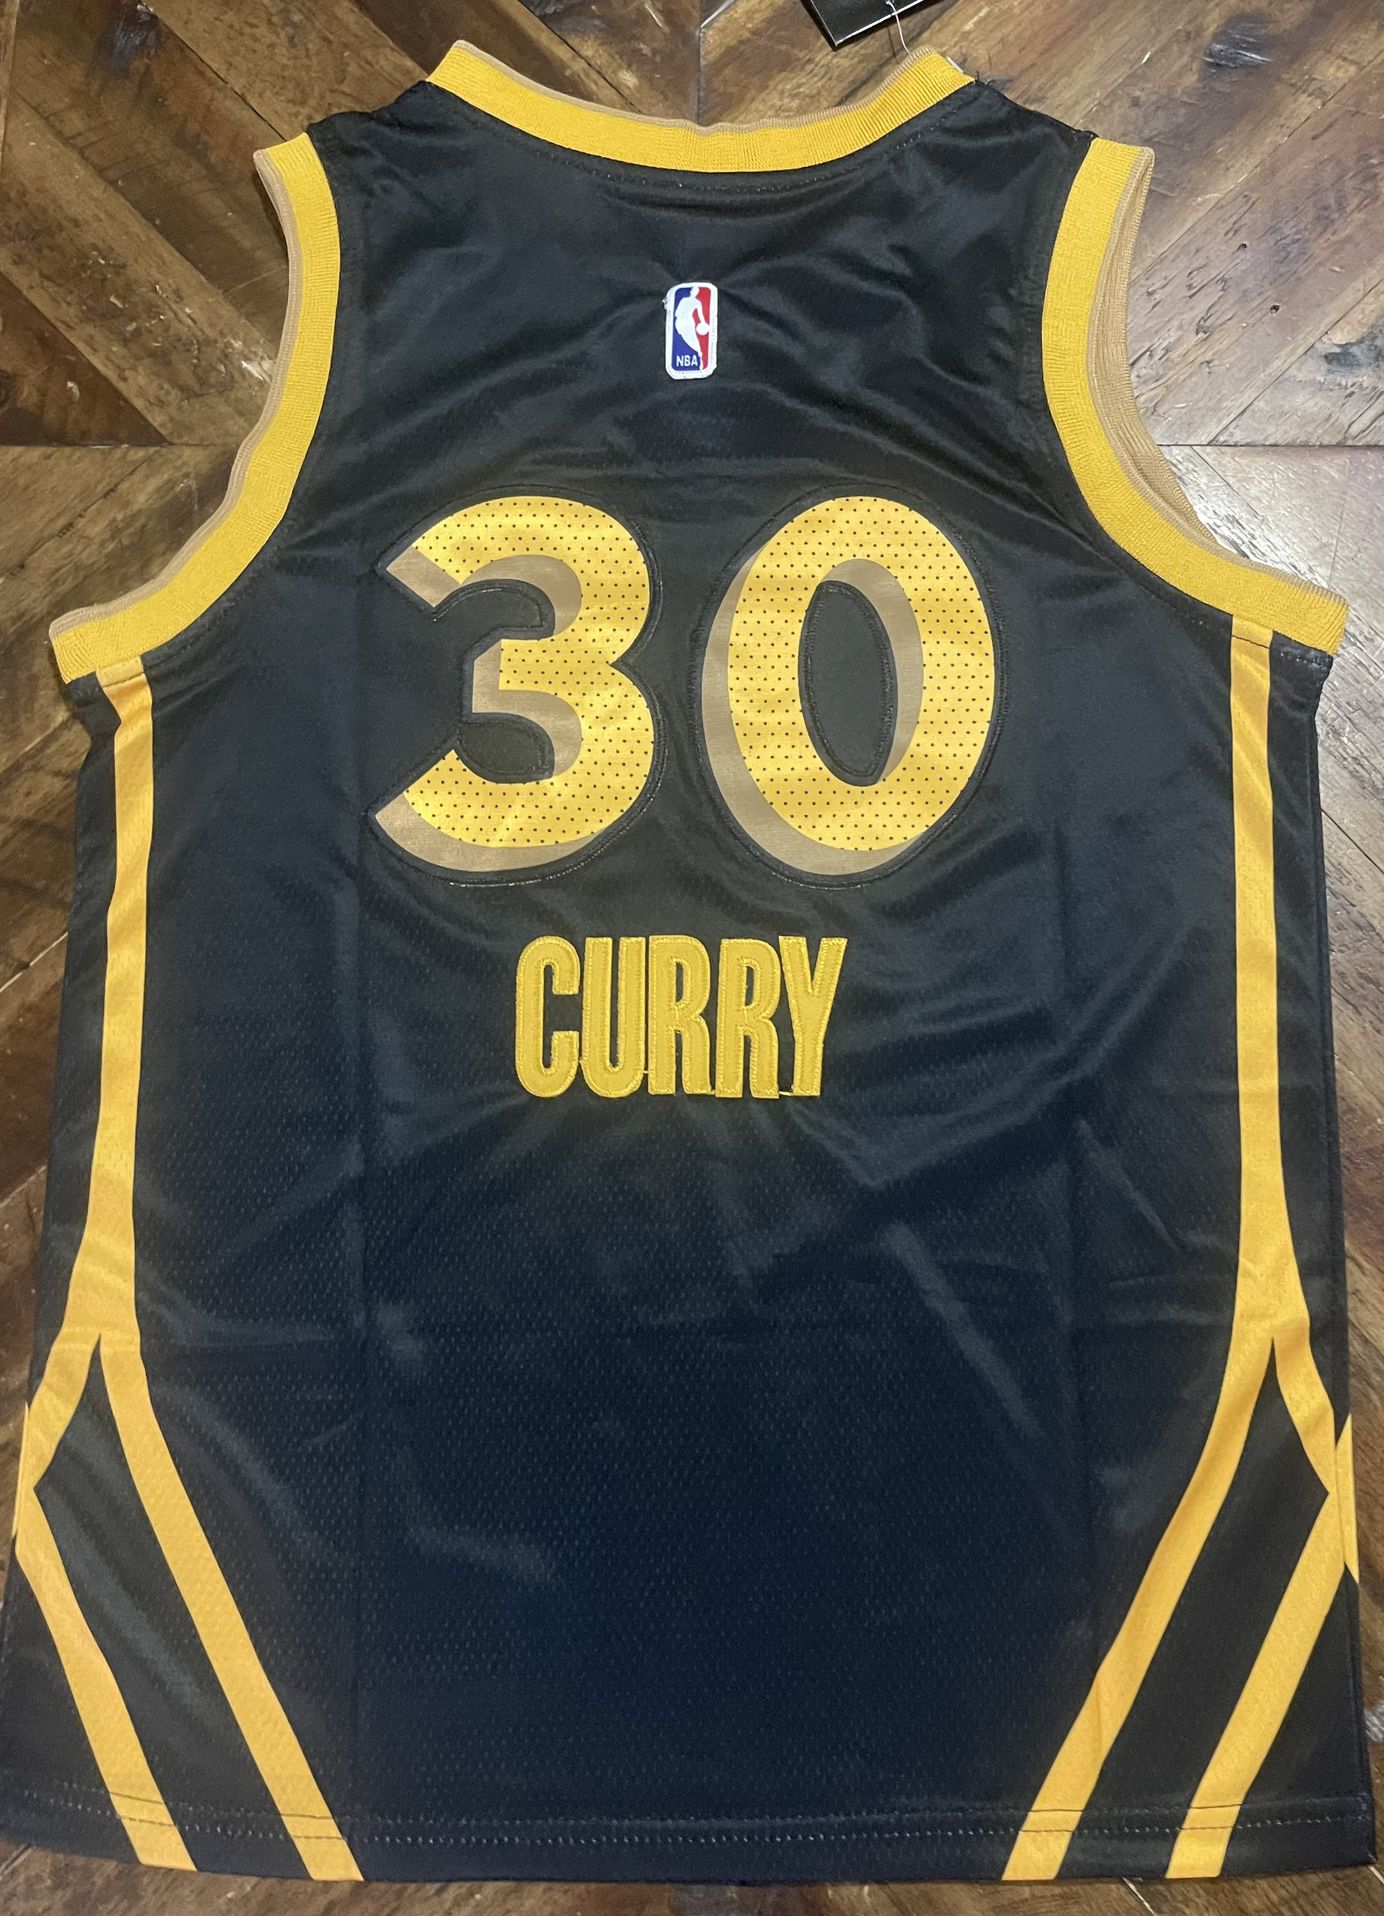 Youth Curry Jersey!!!!!